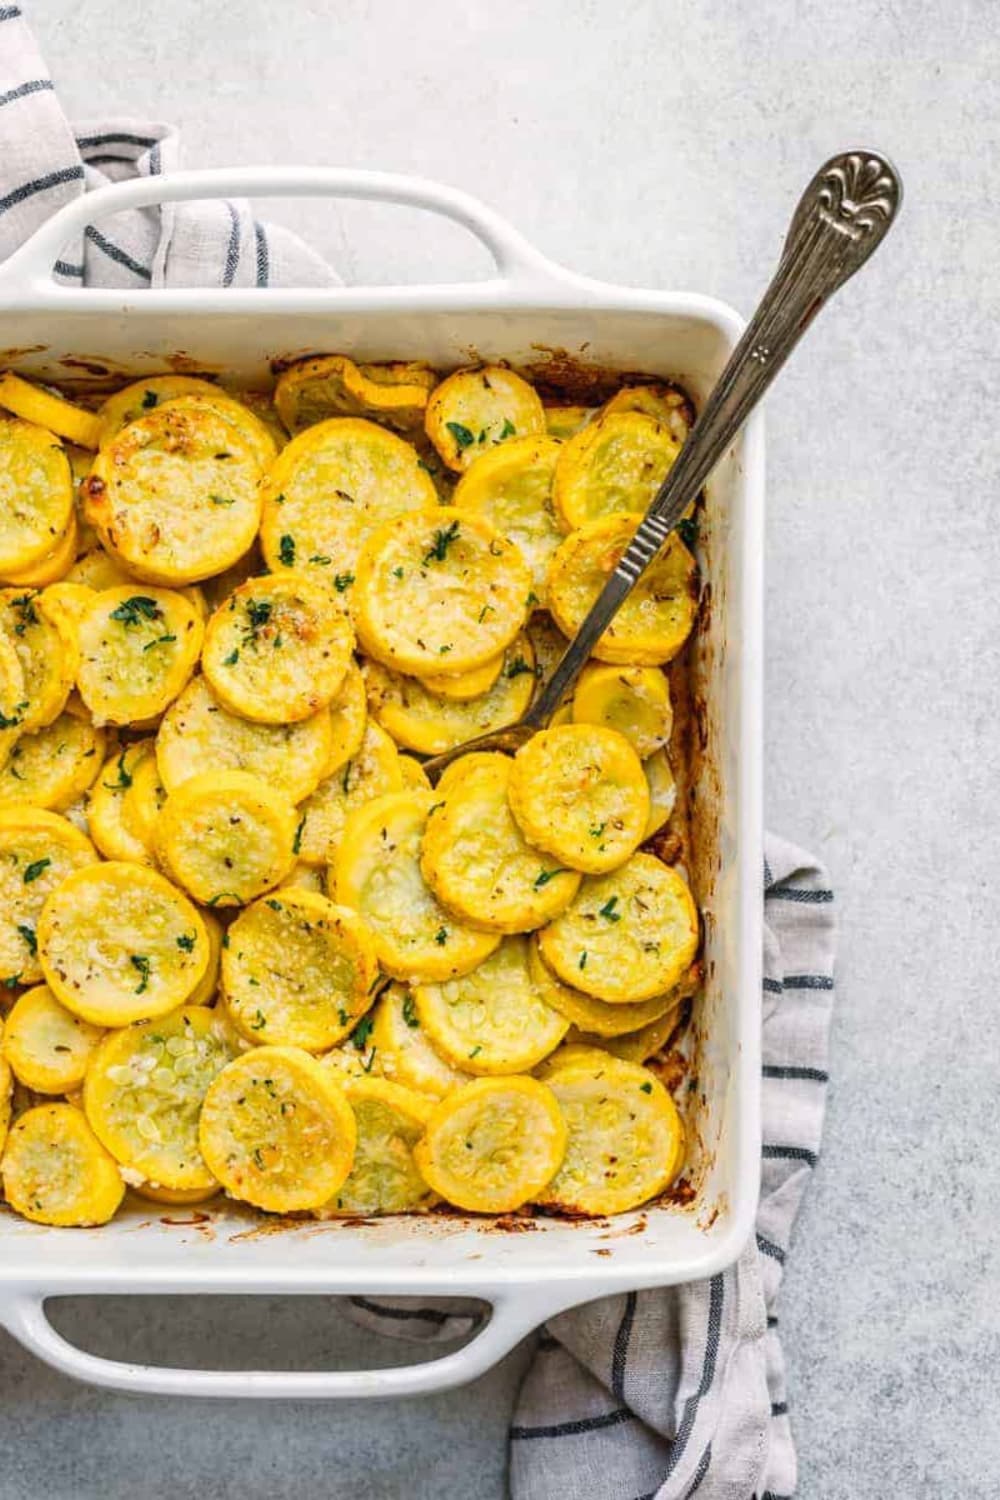 Roasted Yellow Squash With Parmesan Cheese and Herbs